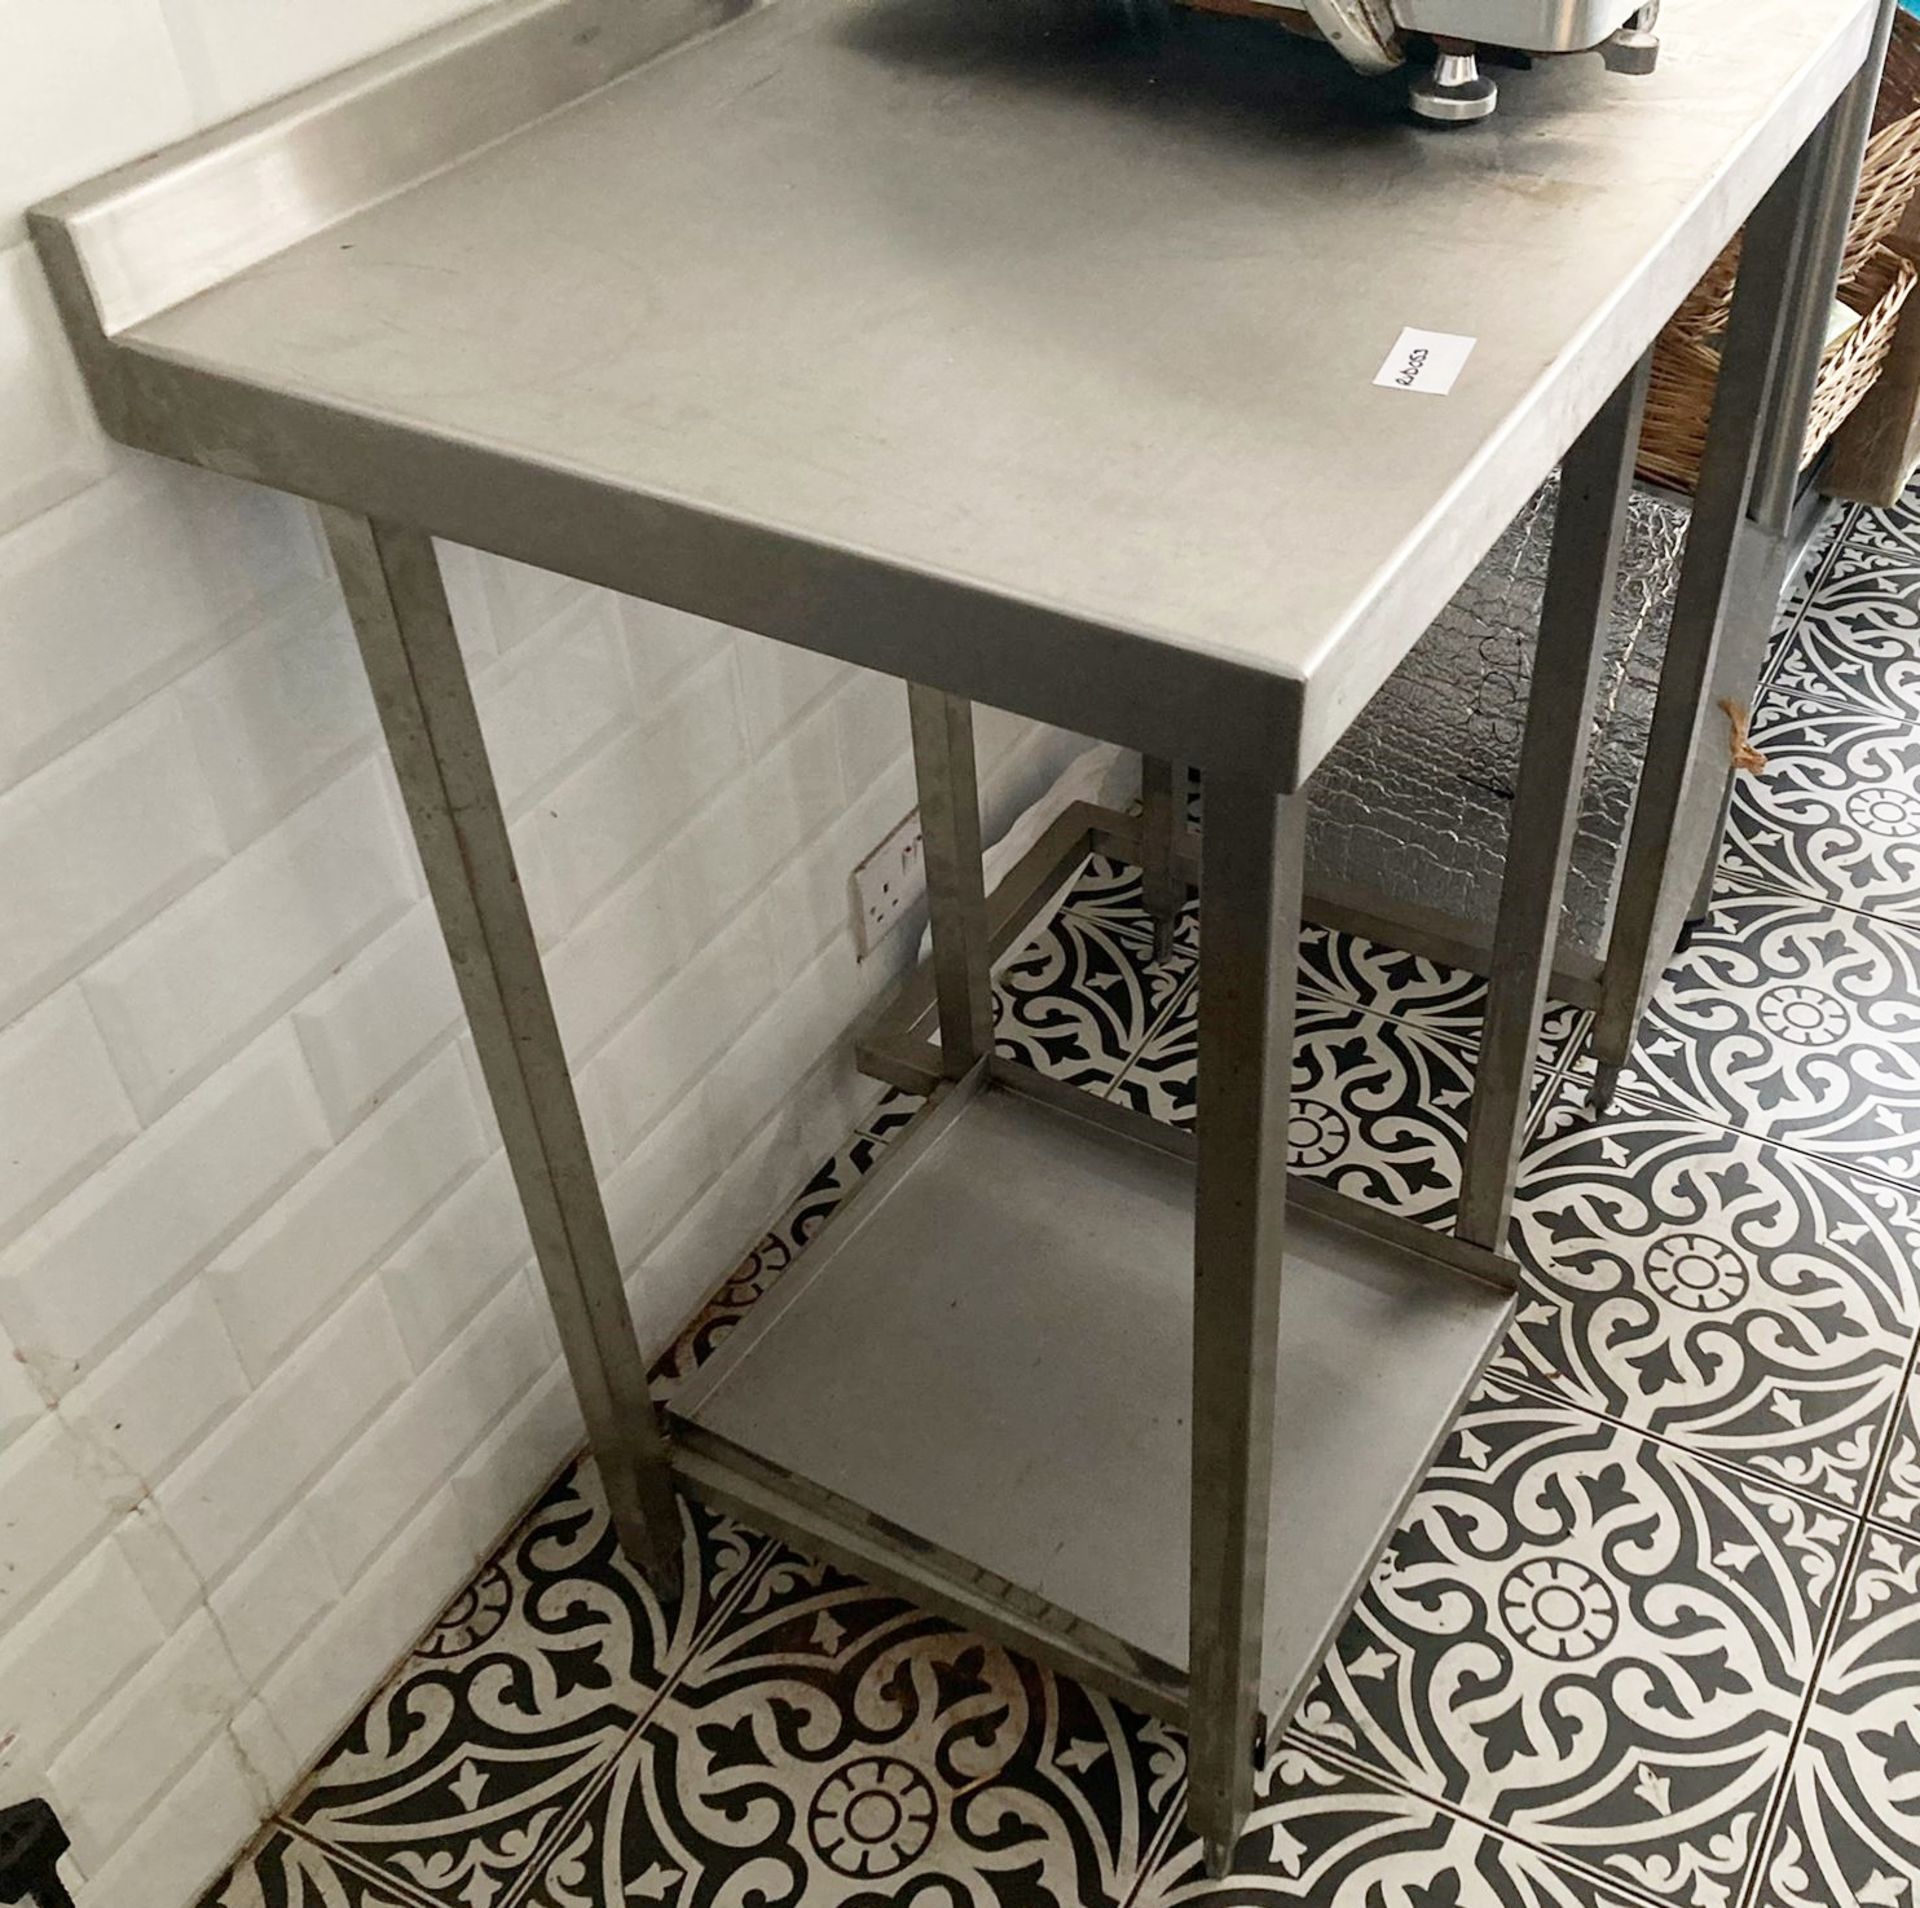 1 x Stainless Steel Prep Table - Dimensions: 90 x 60 x 60 cms - Ref: RVD053 - CL850 - Location: - Image 2 of 2